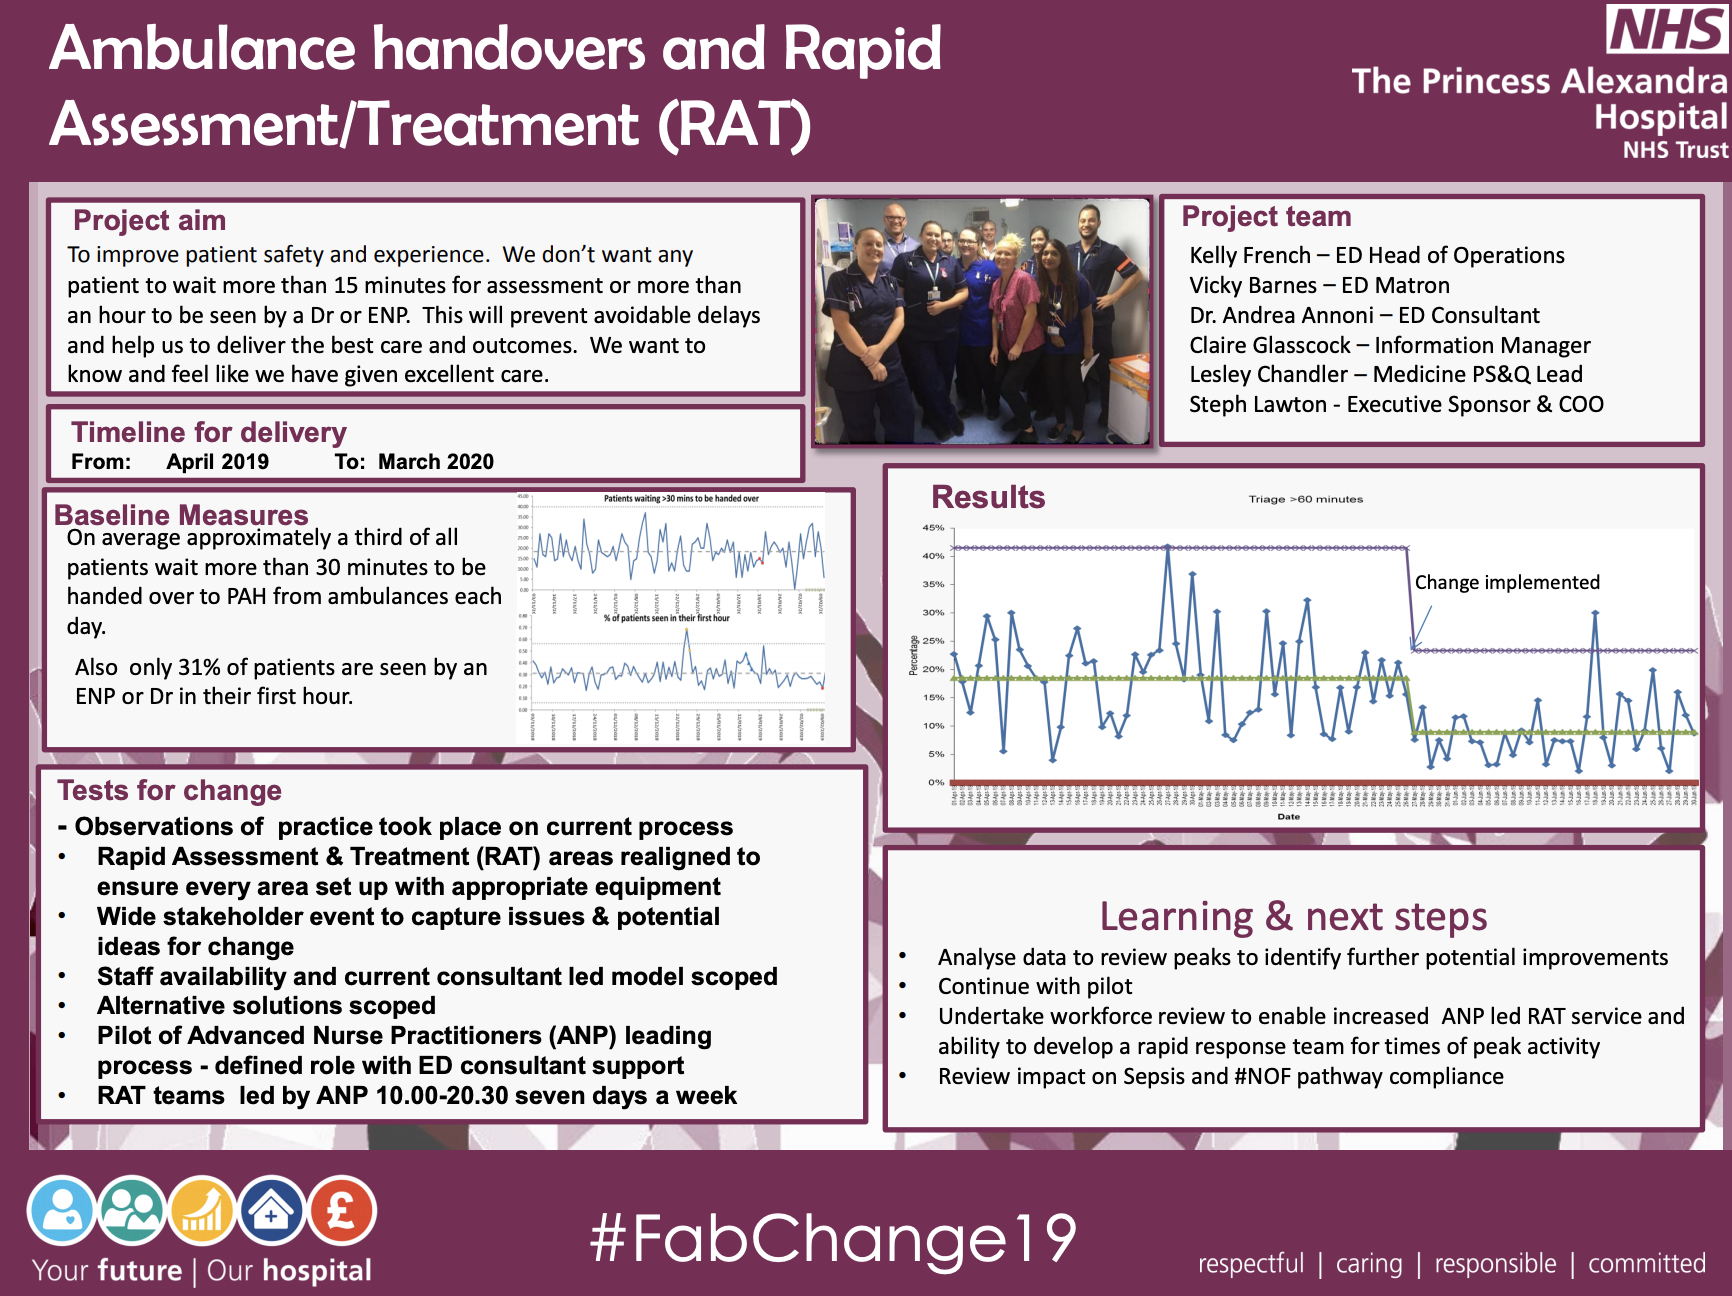 PAHT - Ambulance handovers and Rapid Assessment/Treatment (RAT) - @QualityFirstPAH featured image